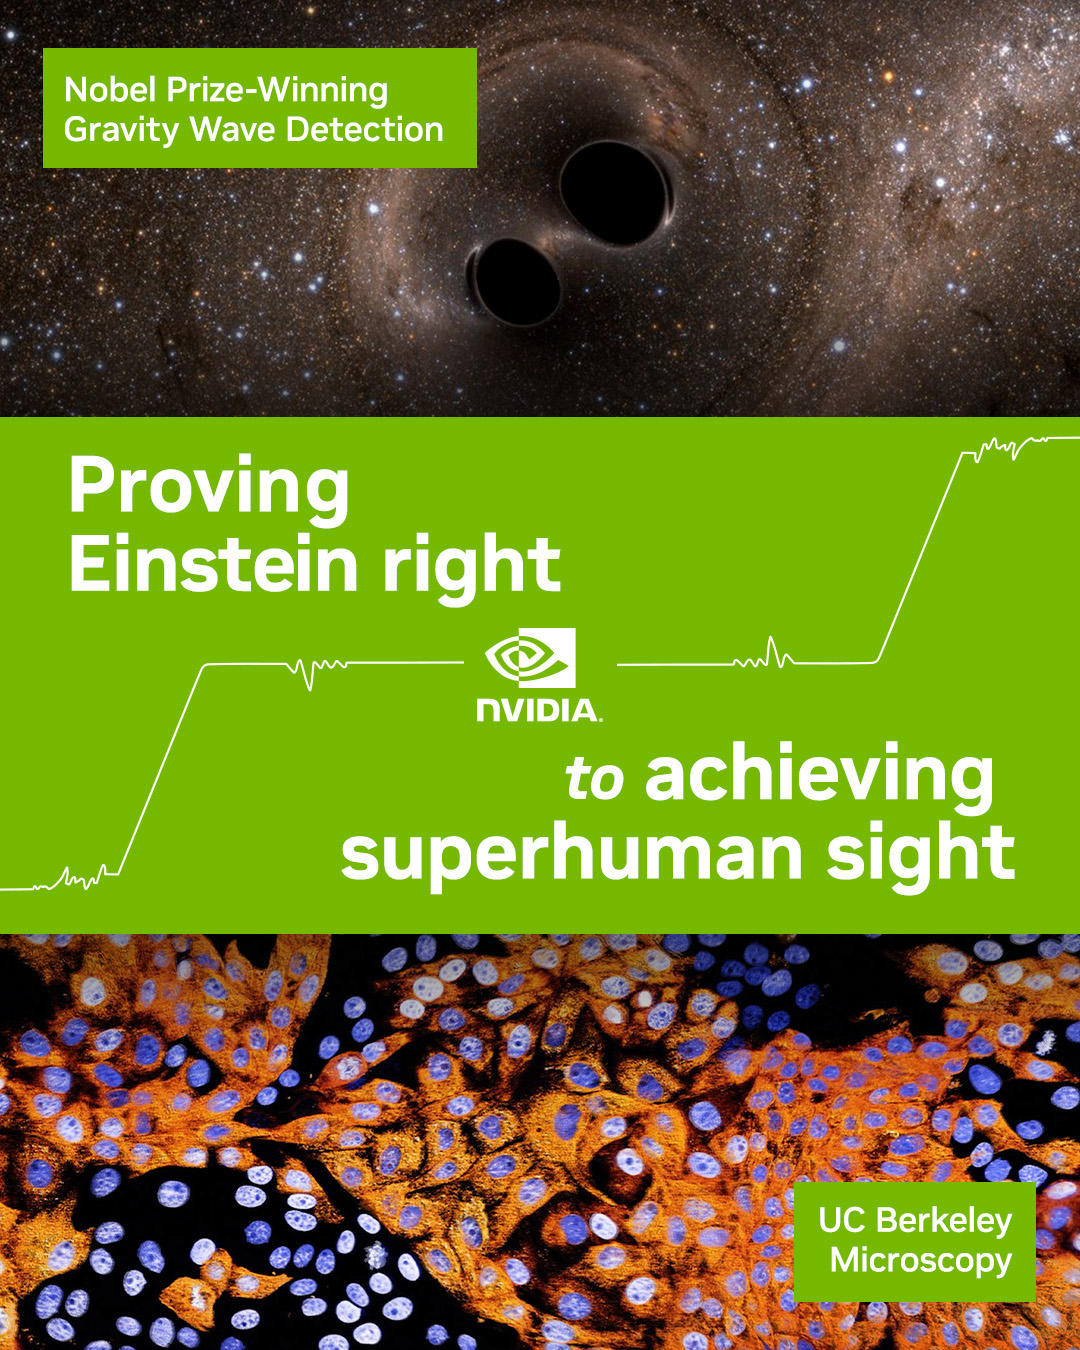 NVIDIA - Our #GPU technology powers incredible scientific breakthroughs